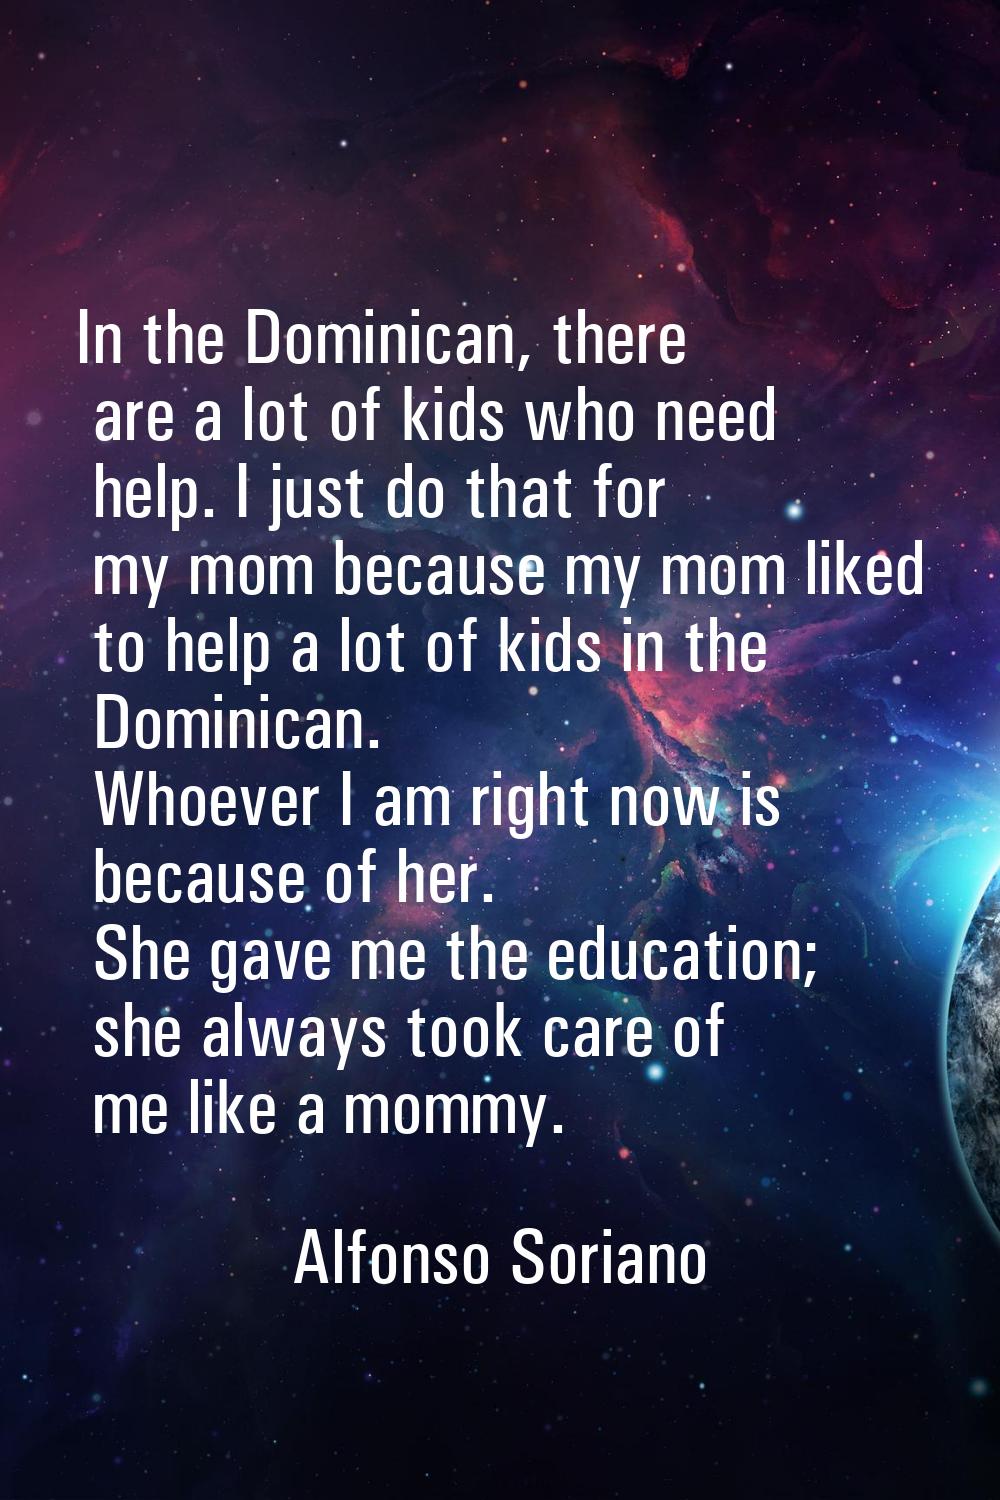 In the Dominican, there are a lot of kids who need help. I just do that for my mom because my mom l